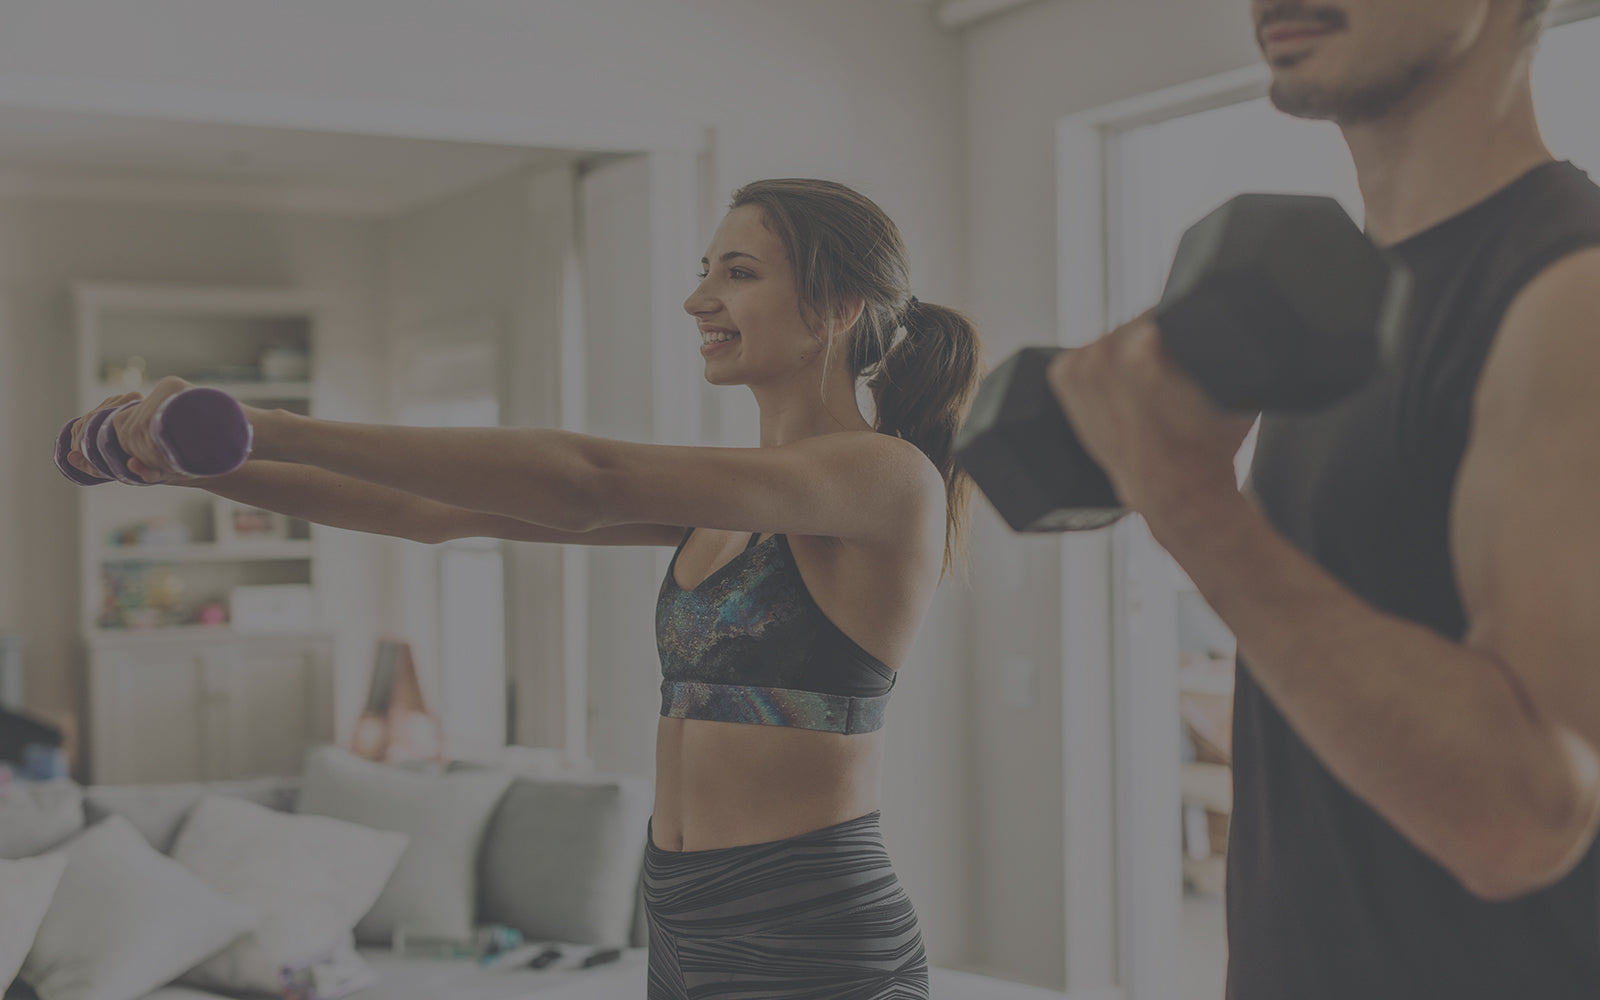 woman and man standing up lifting weights in living room